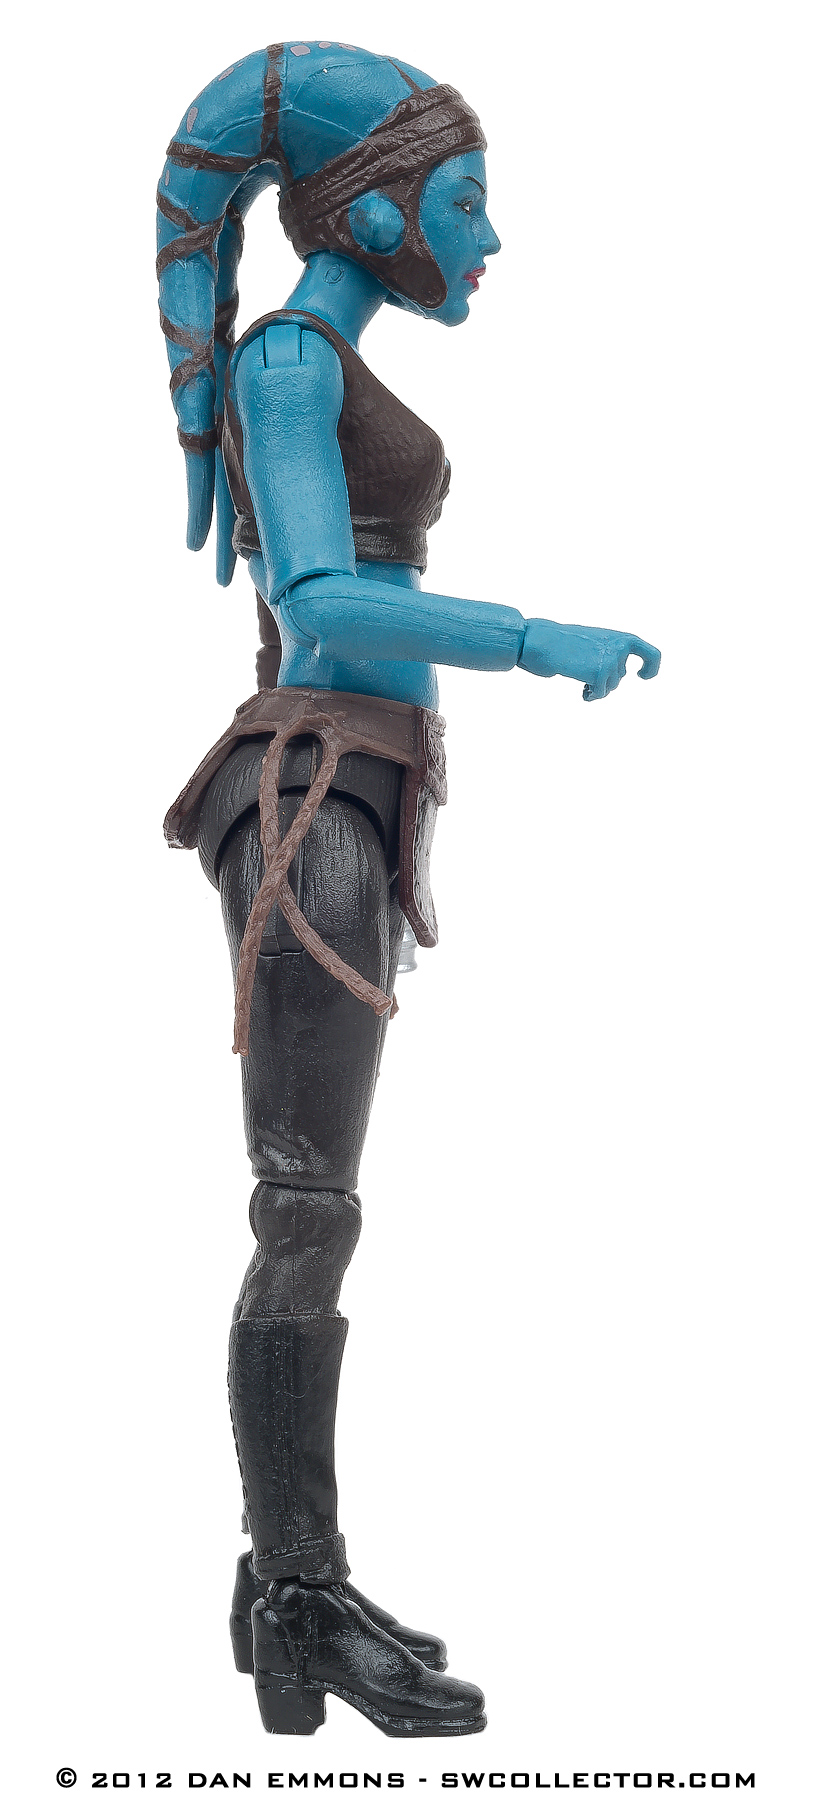 The Vintage Collection - VC58: Aayla Secura